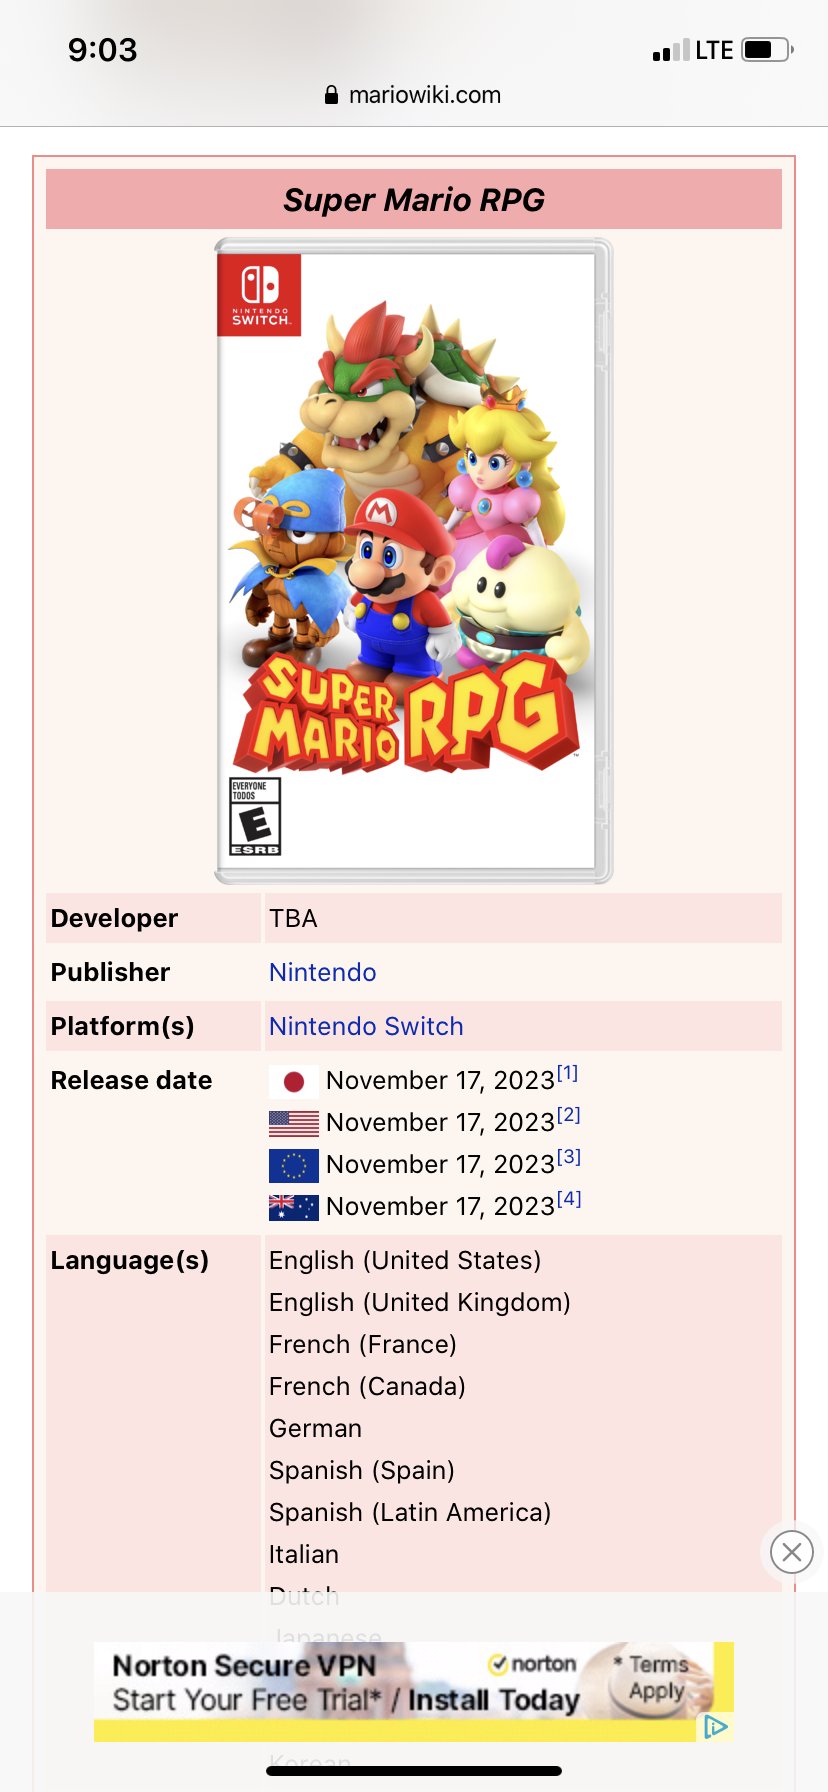 JBX9001 on X: So I stopped by the Super Mario Wiki to see if they had a  page for the Super Mario RPG remake, and noticed something particular of  interest; Square Enix